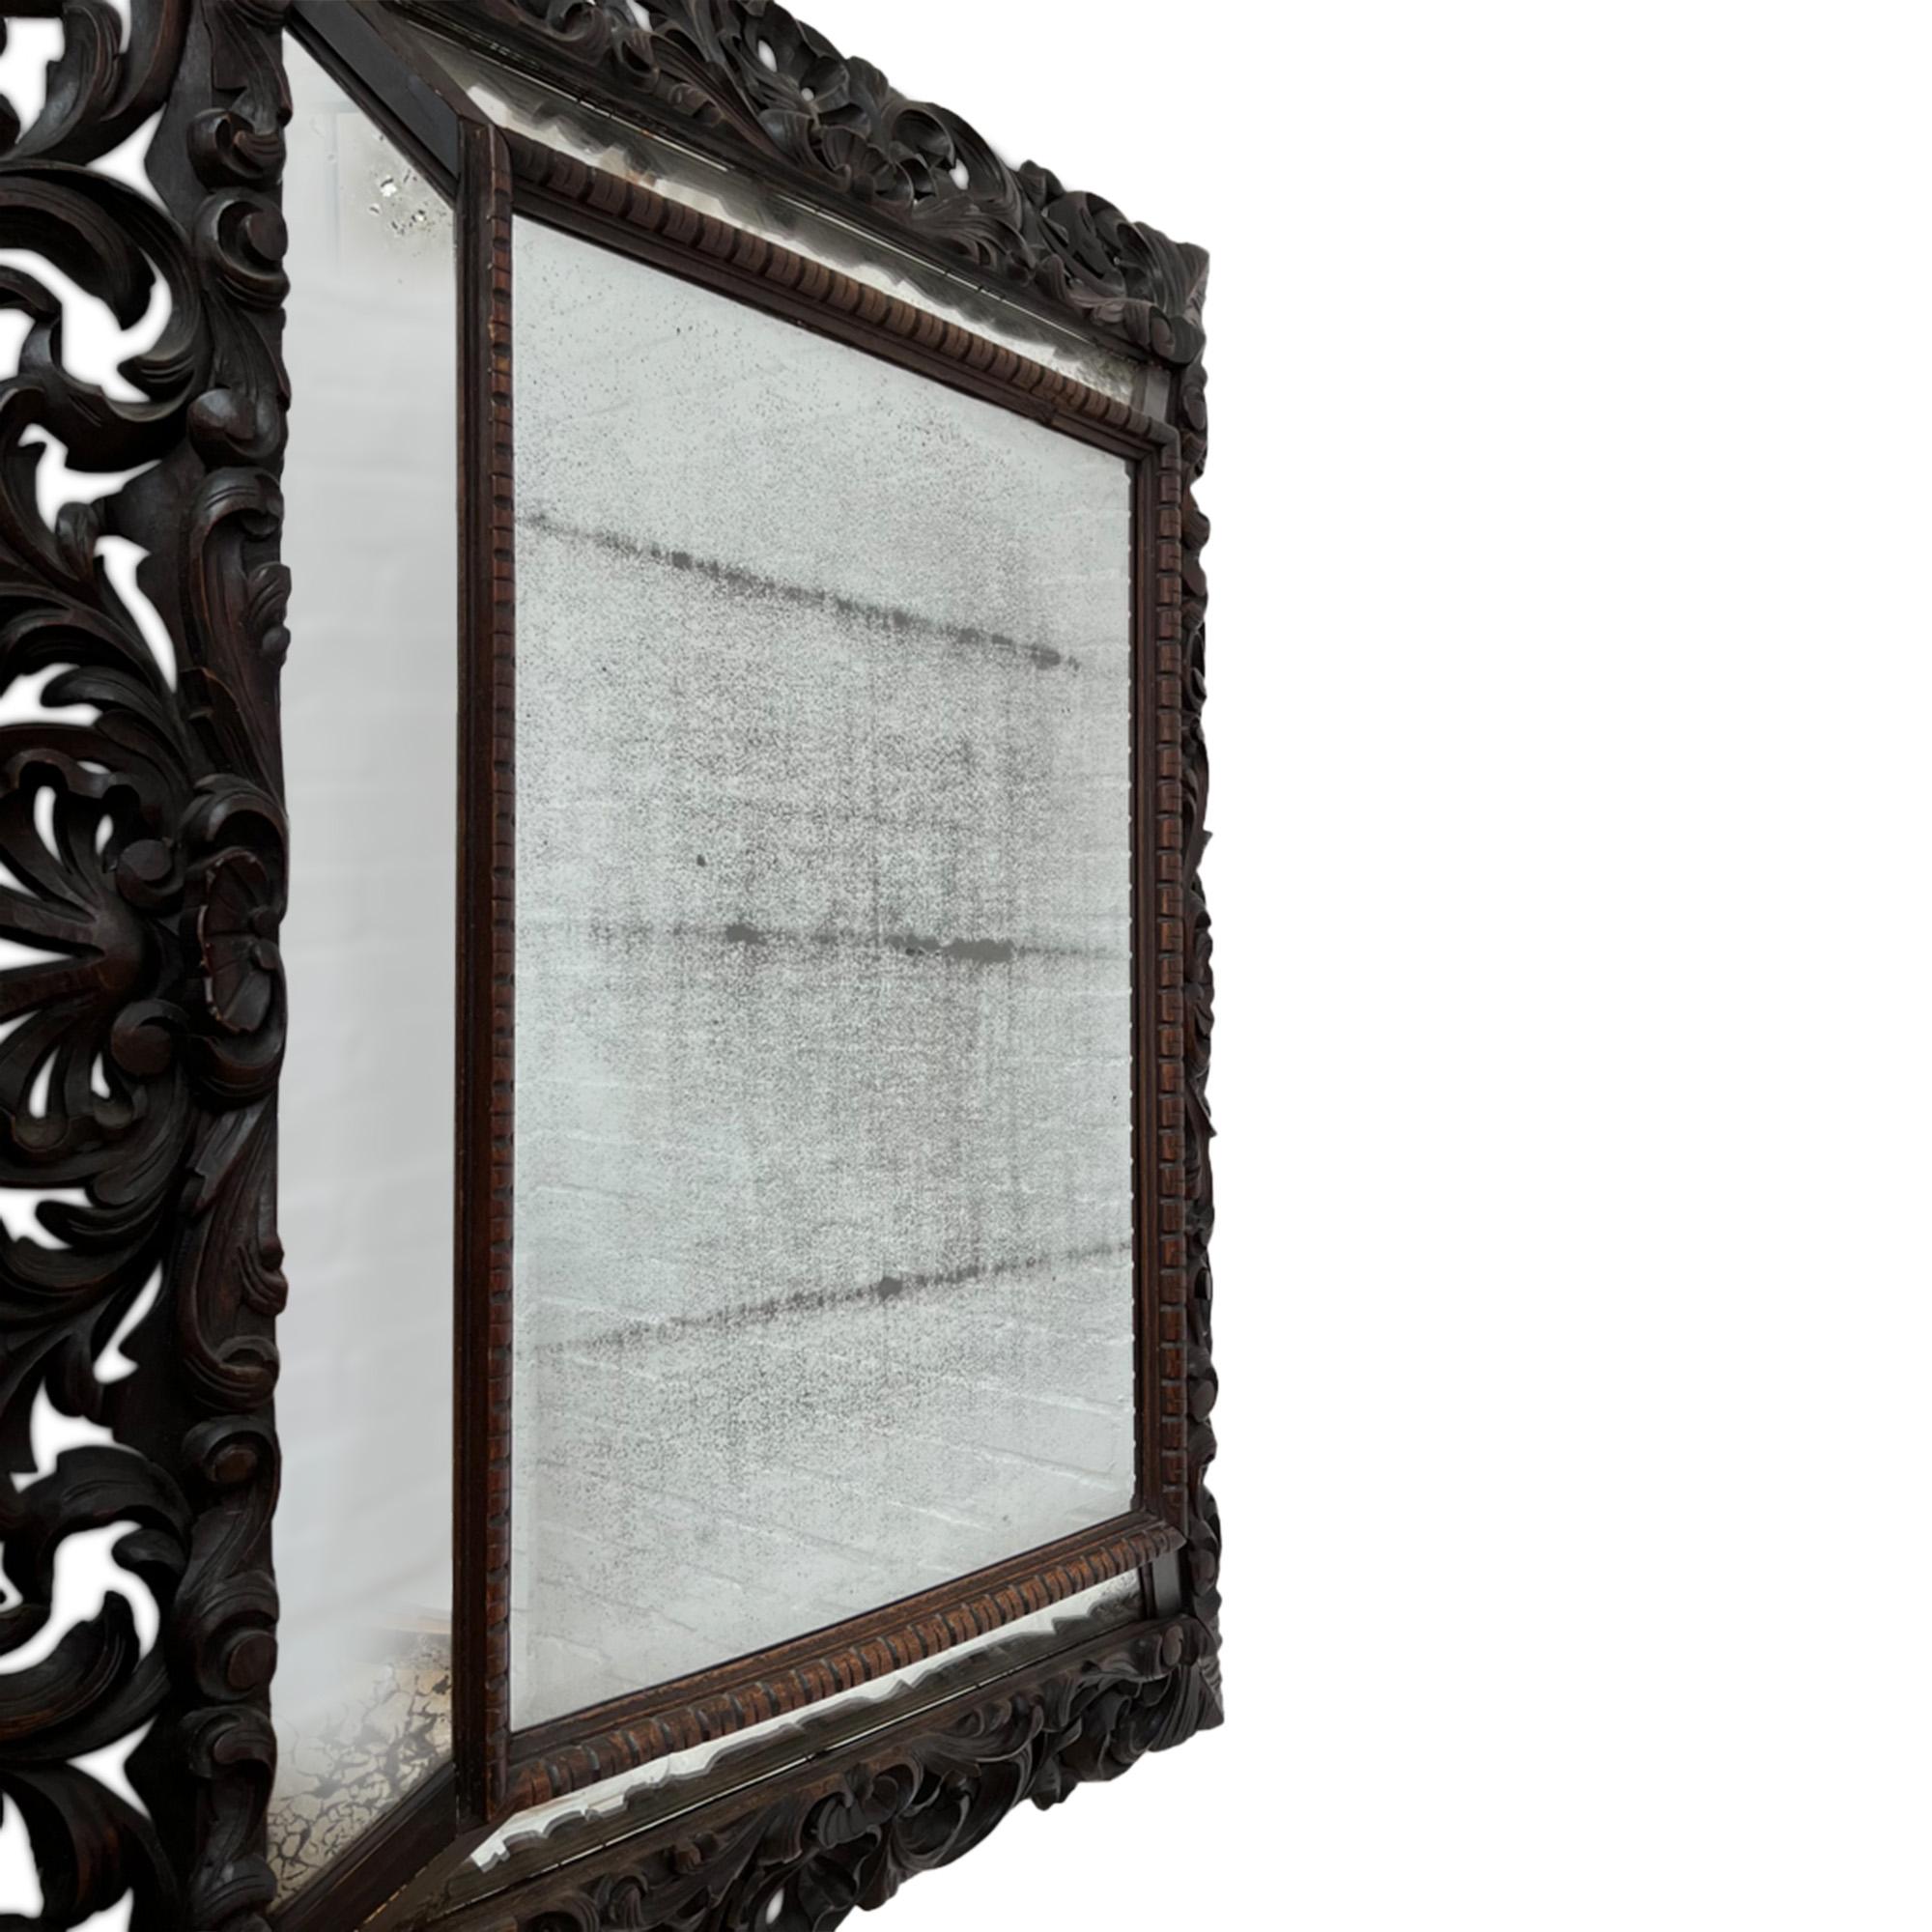 This beautiful mirror was made in Italy in the 19th century.

Large and impressive with lovely detail on the carved wood frame. 

A very decorative piece.